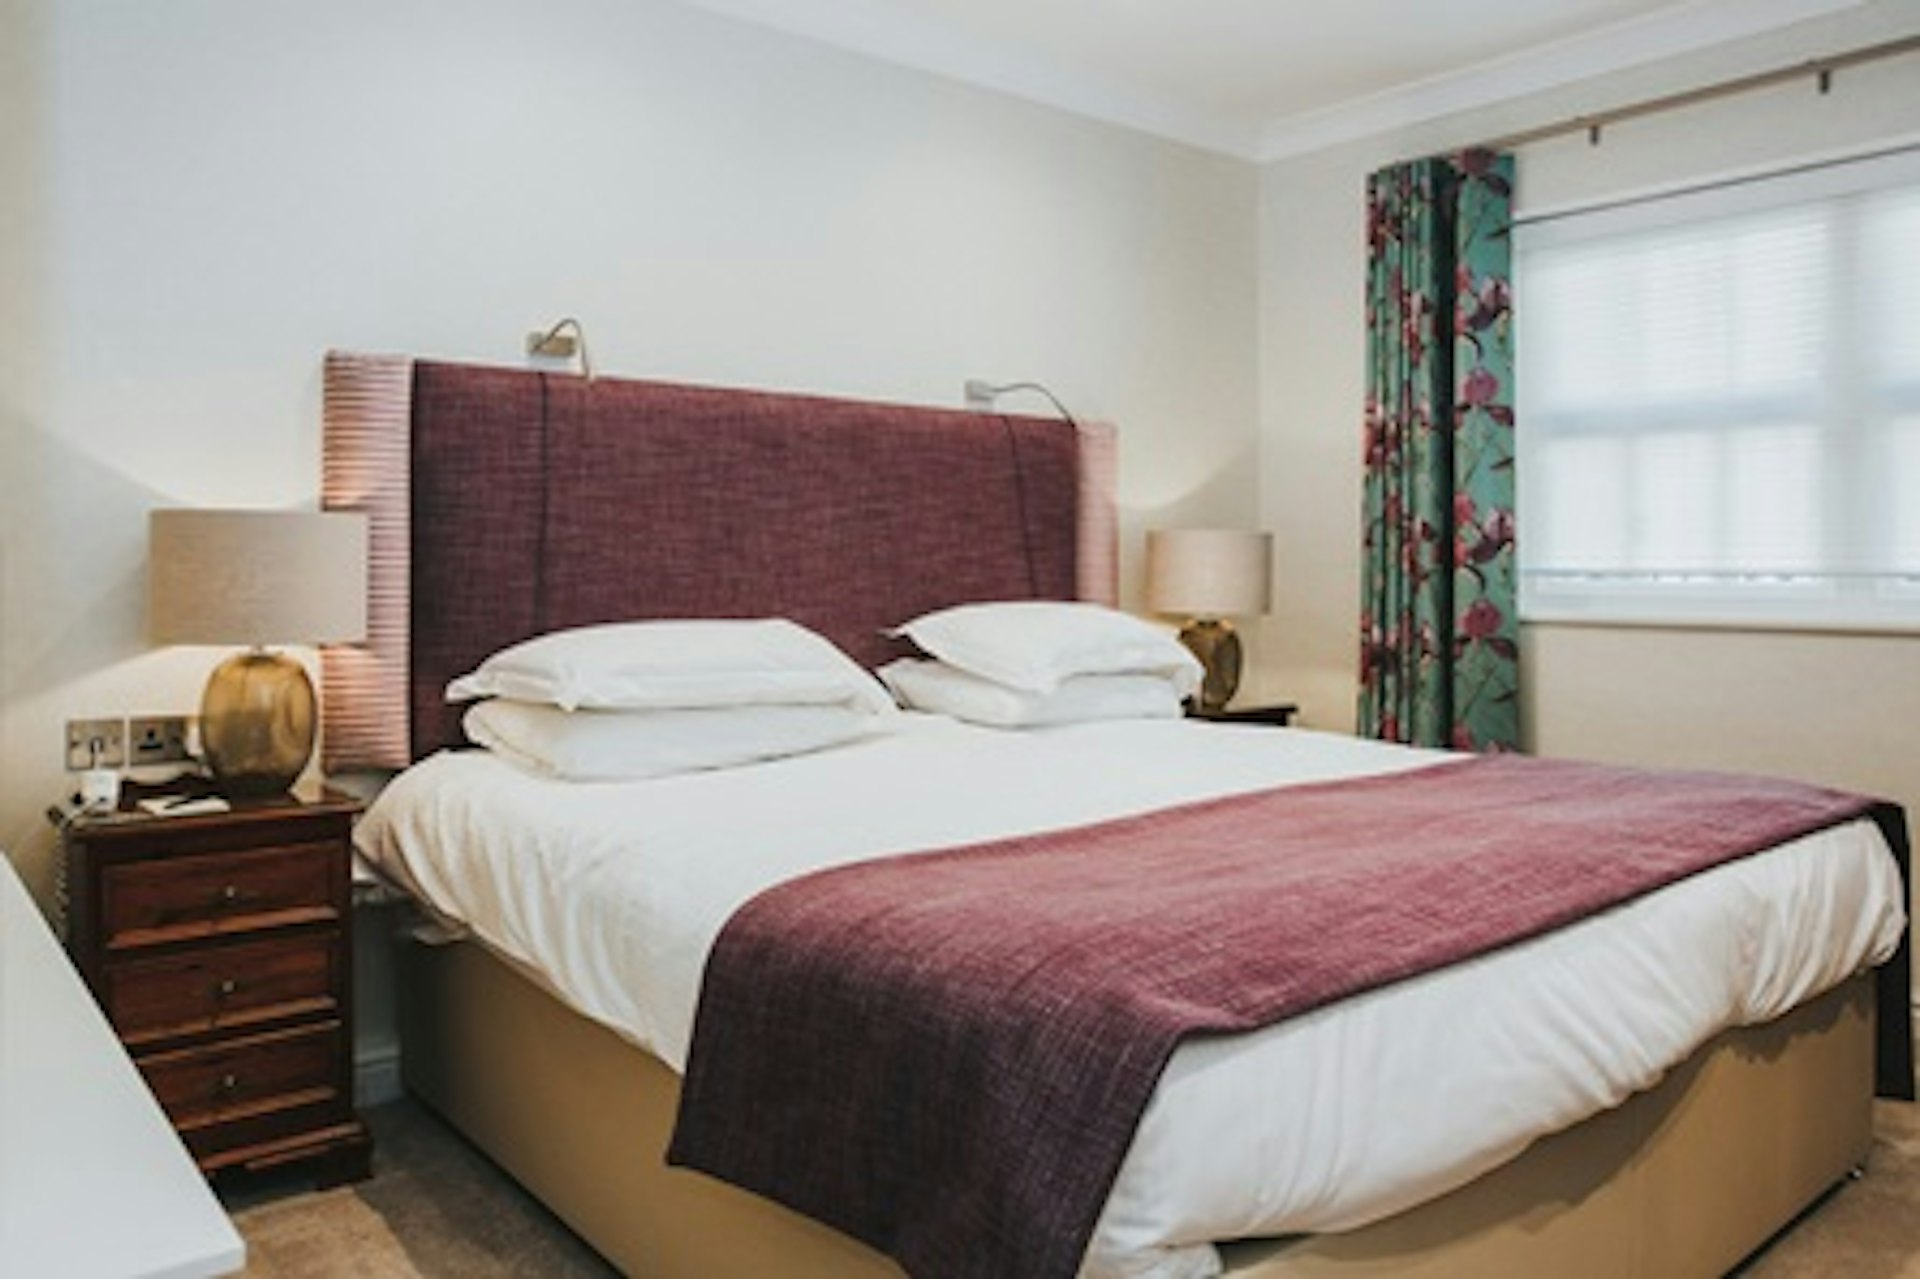 One Night Lake District Break with Dinner for Two at Briery Wood Country House Hotel, Windermere 2